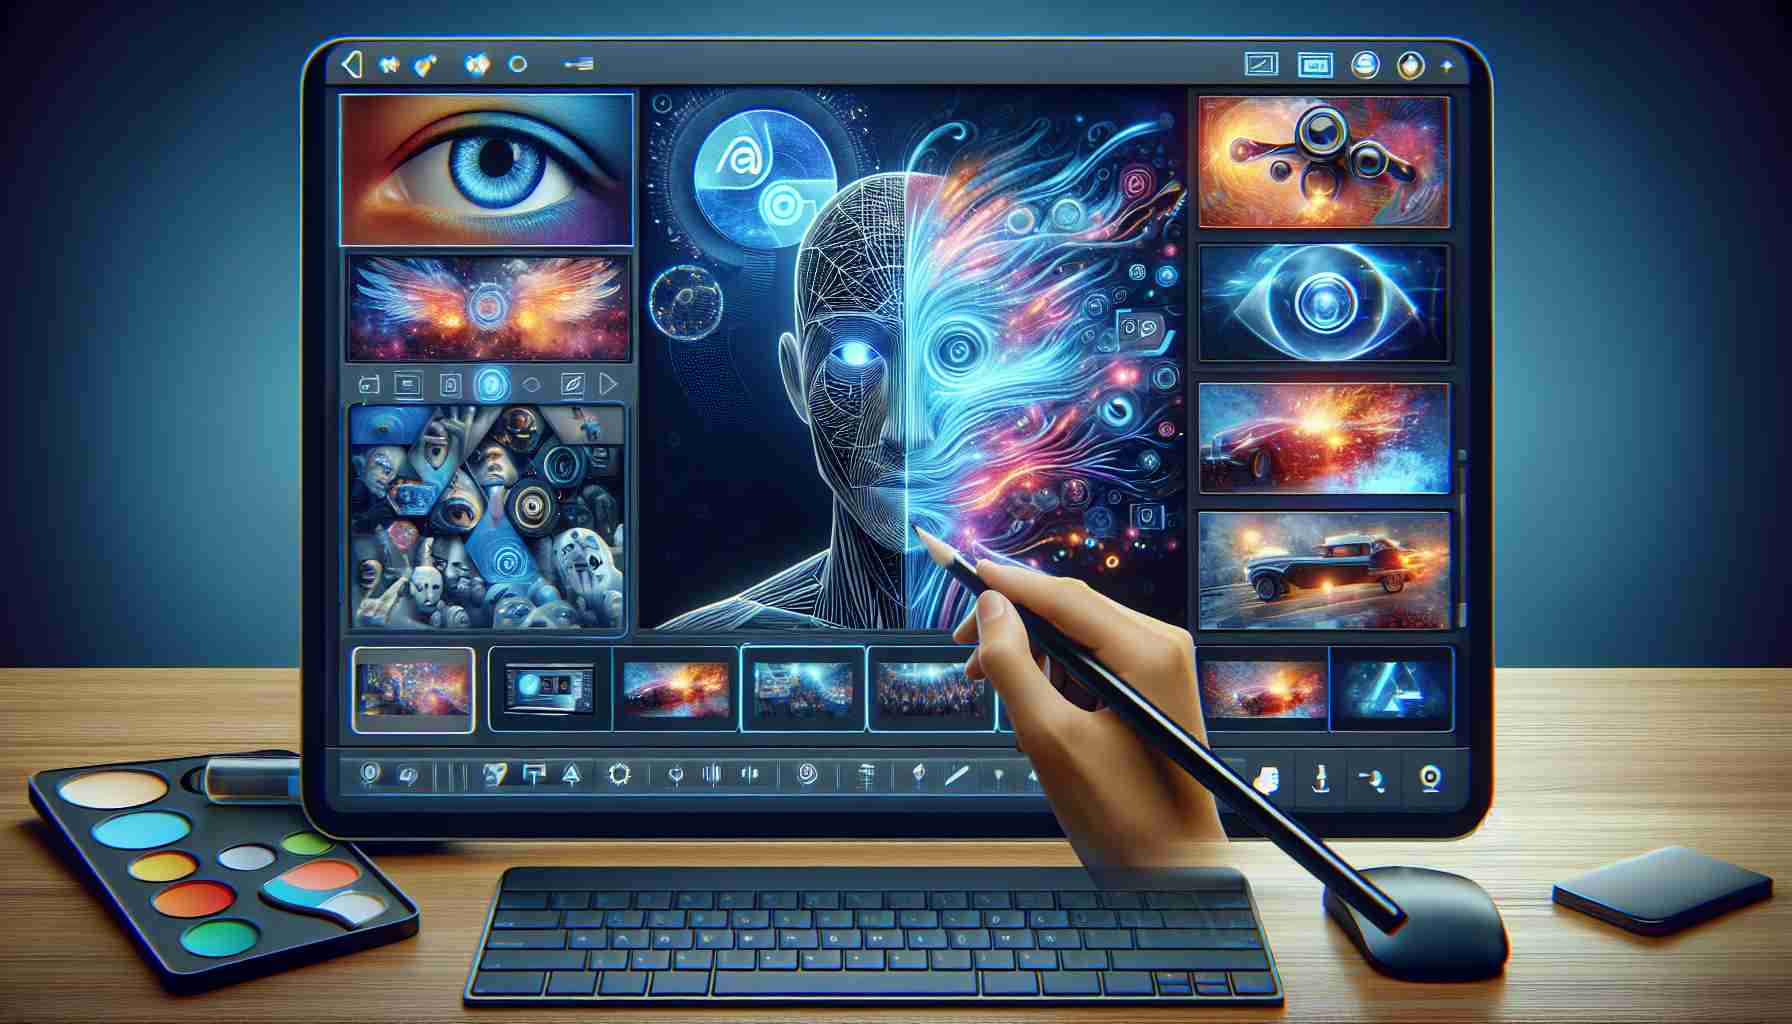 Adobe Innovates with AI Video Creation Tool